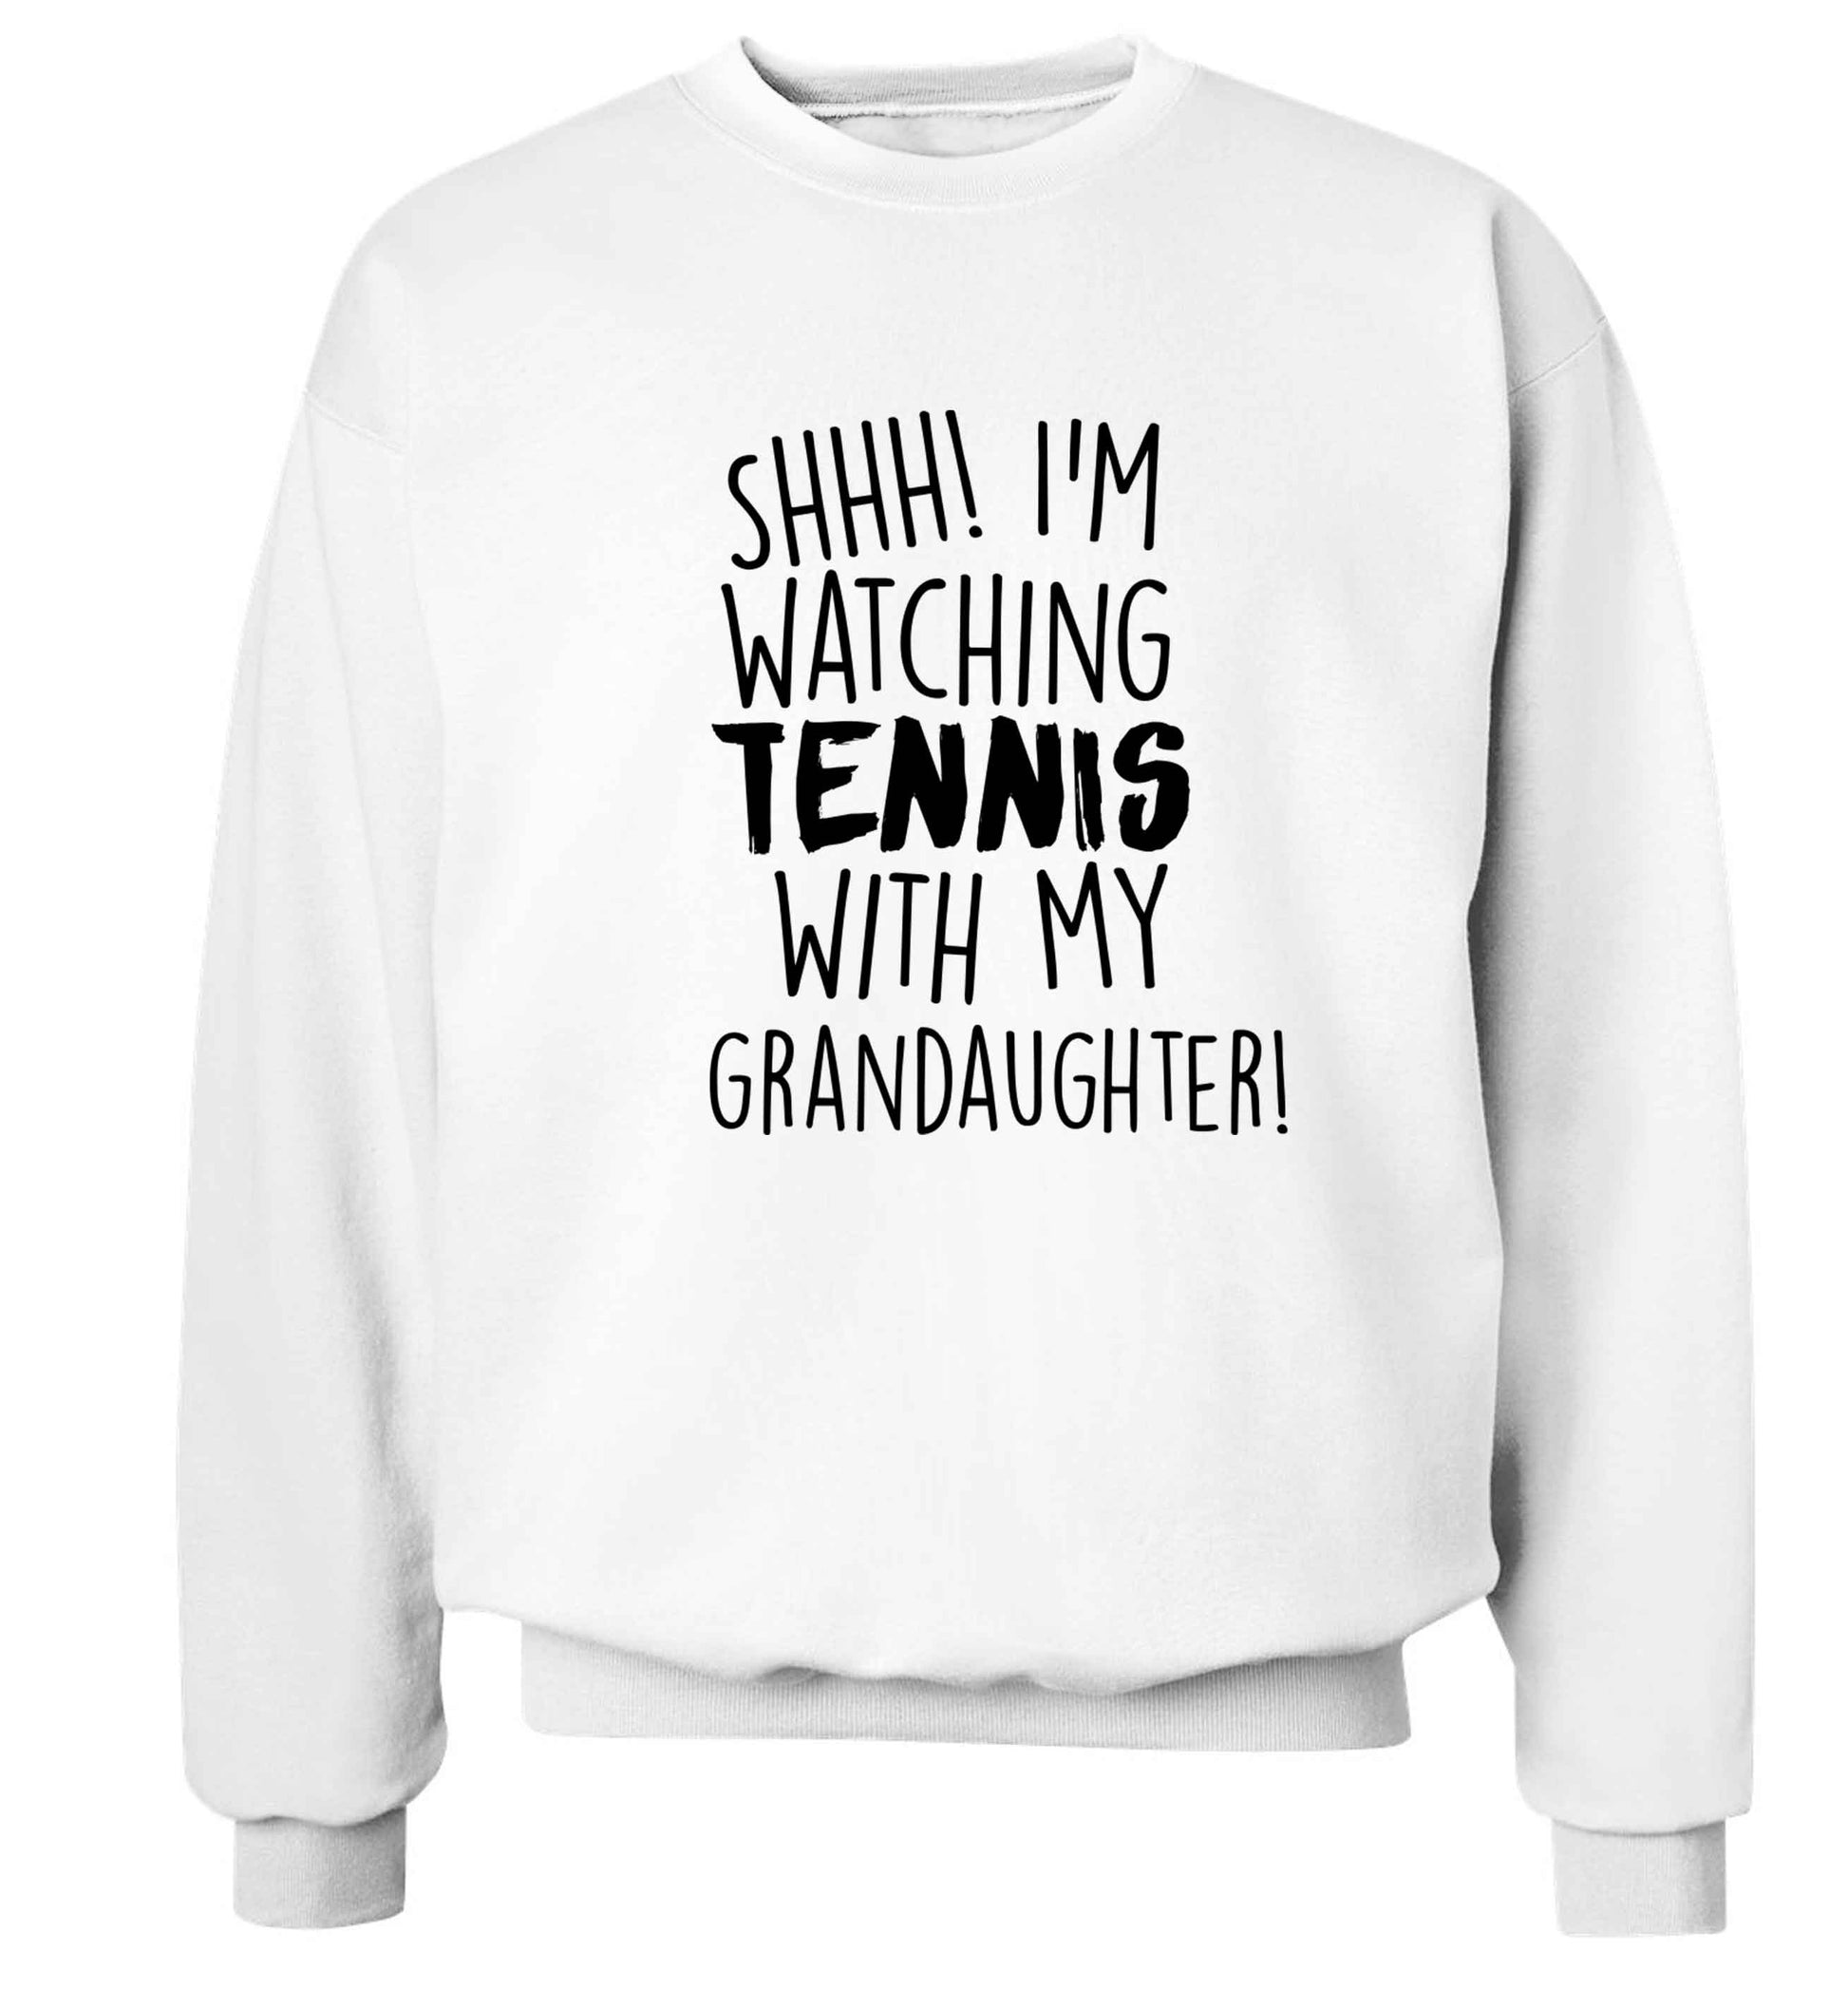 Shh! I'm watching tennis with my granddaughter! Adult's unisex white Sweater 2XL